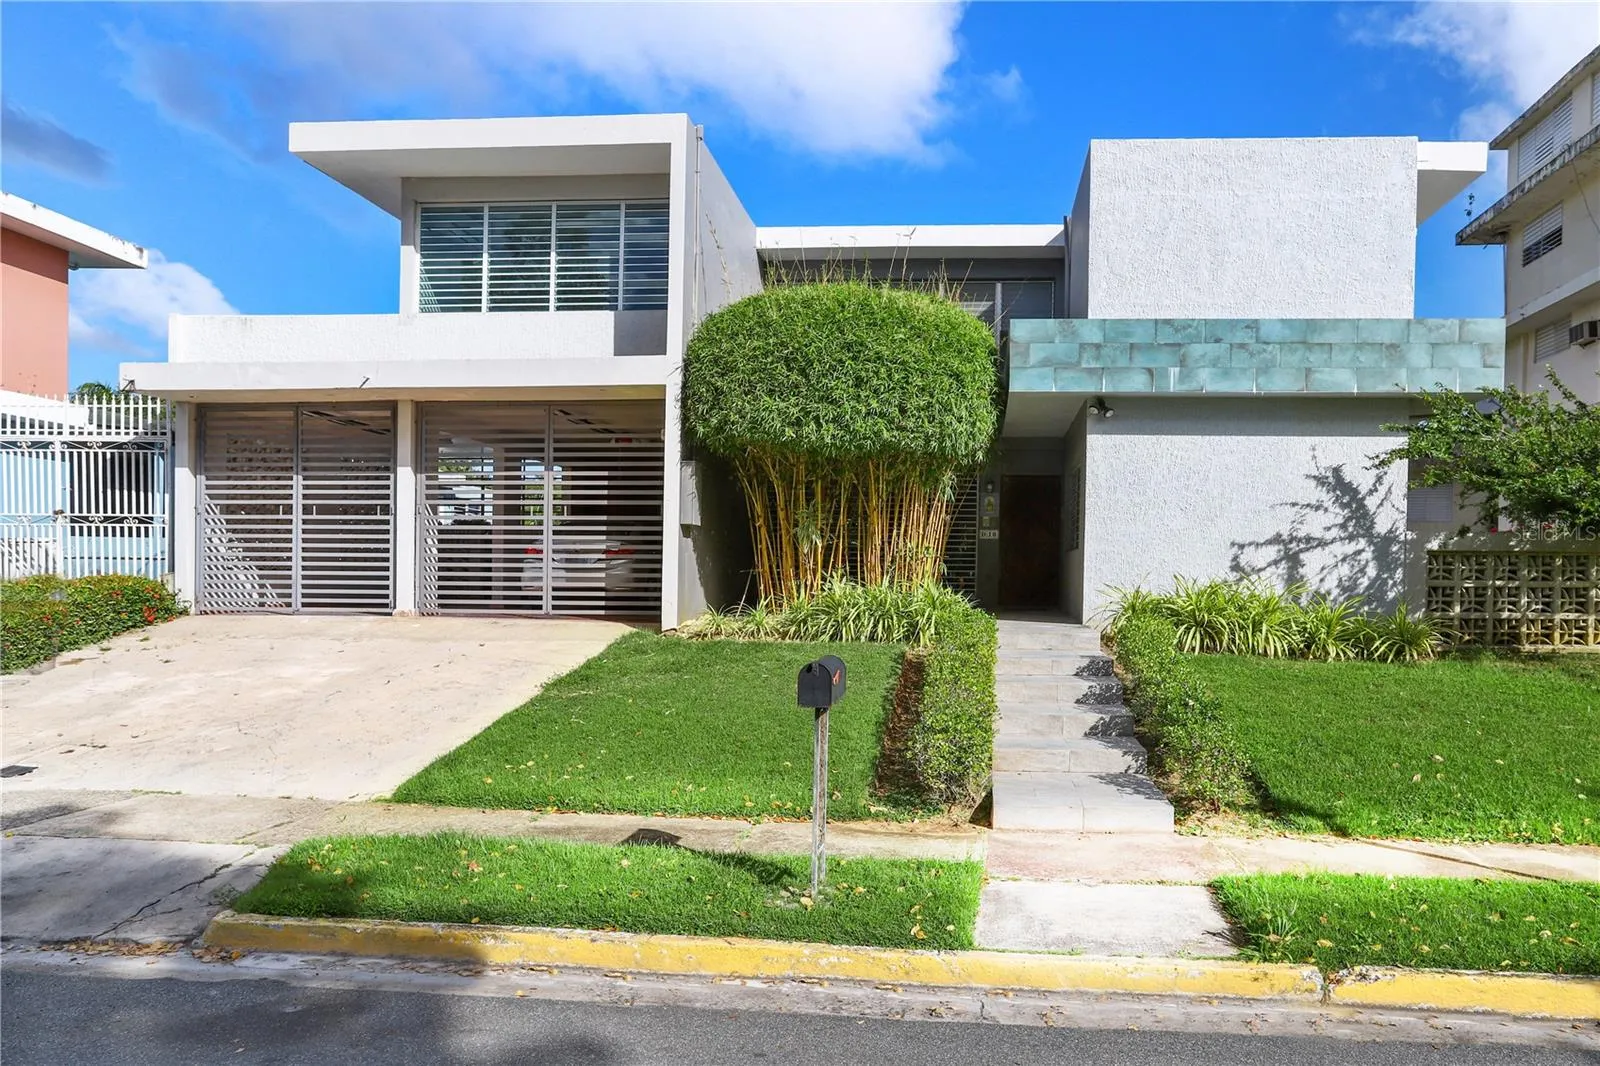 . CLL ROMA STREET, Guaynabo, Puerto Rico 00966, 5 Bedrooms Bedrooms, ,5 BathroomsBathrooms,Residential,For Sale,CLL ROMA,PR9106115